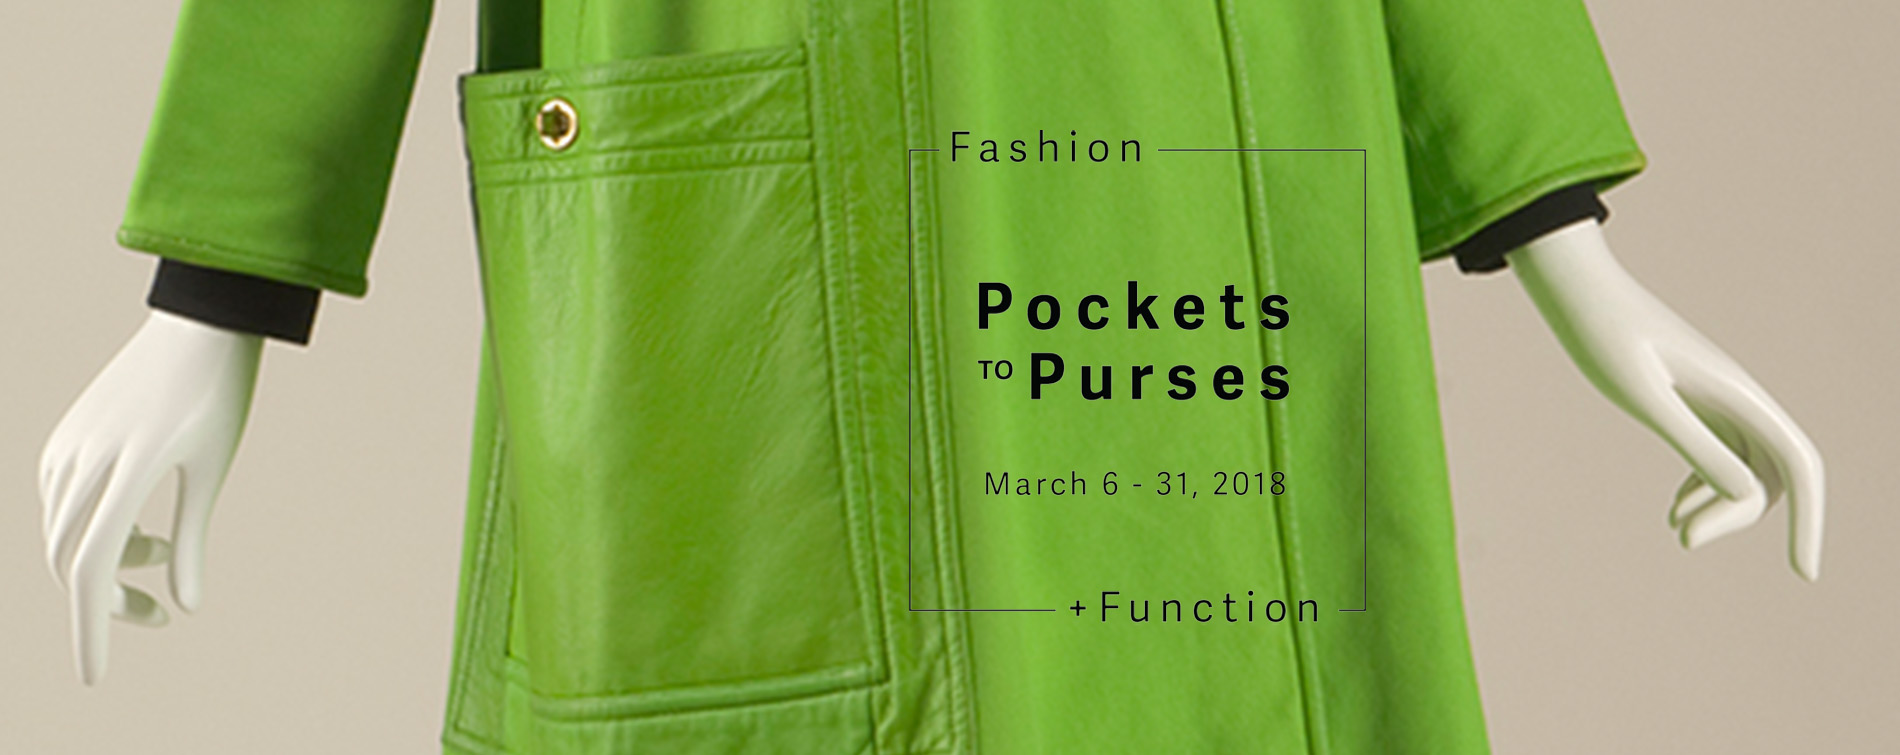 Pockets to Purses: Fashion + Function graphic